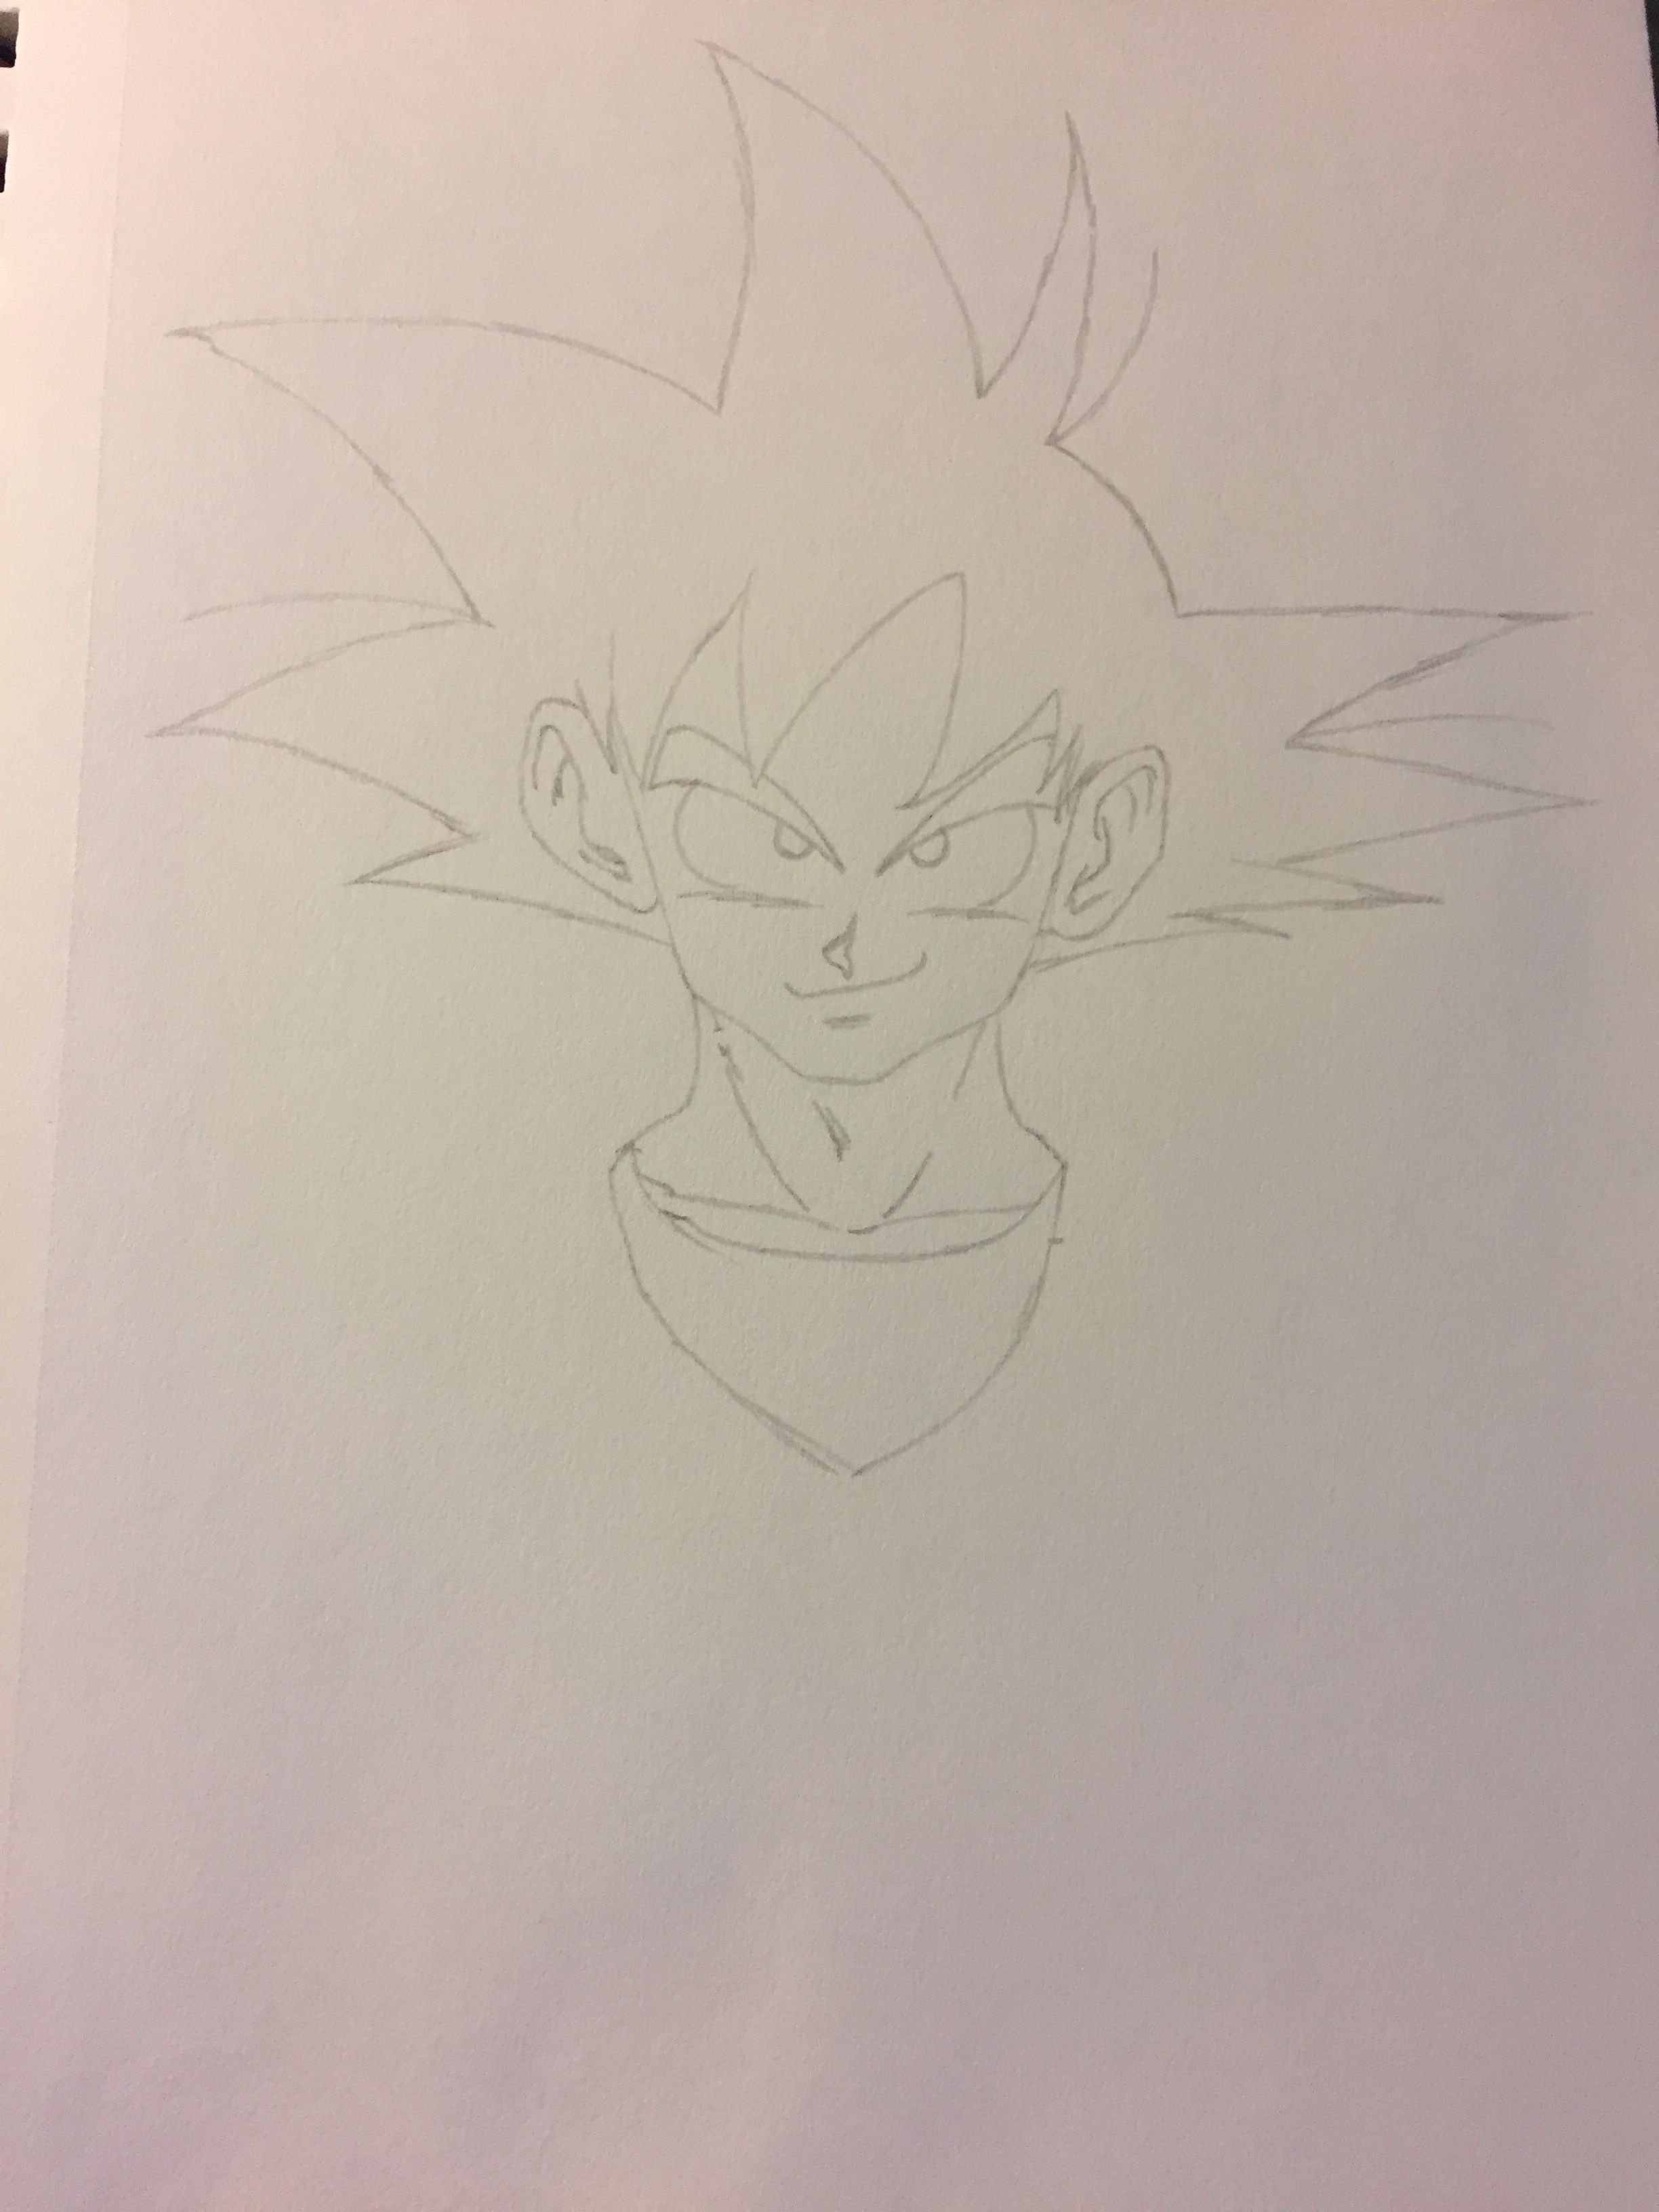 Son Goku from Dragonball Z Anime, Speed Drawing, Time Lapse